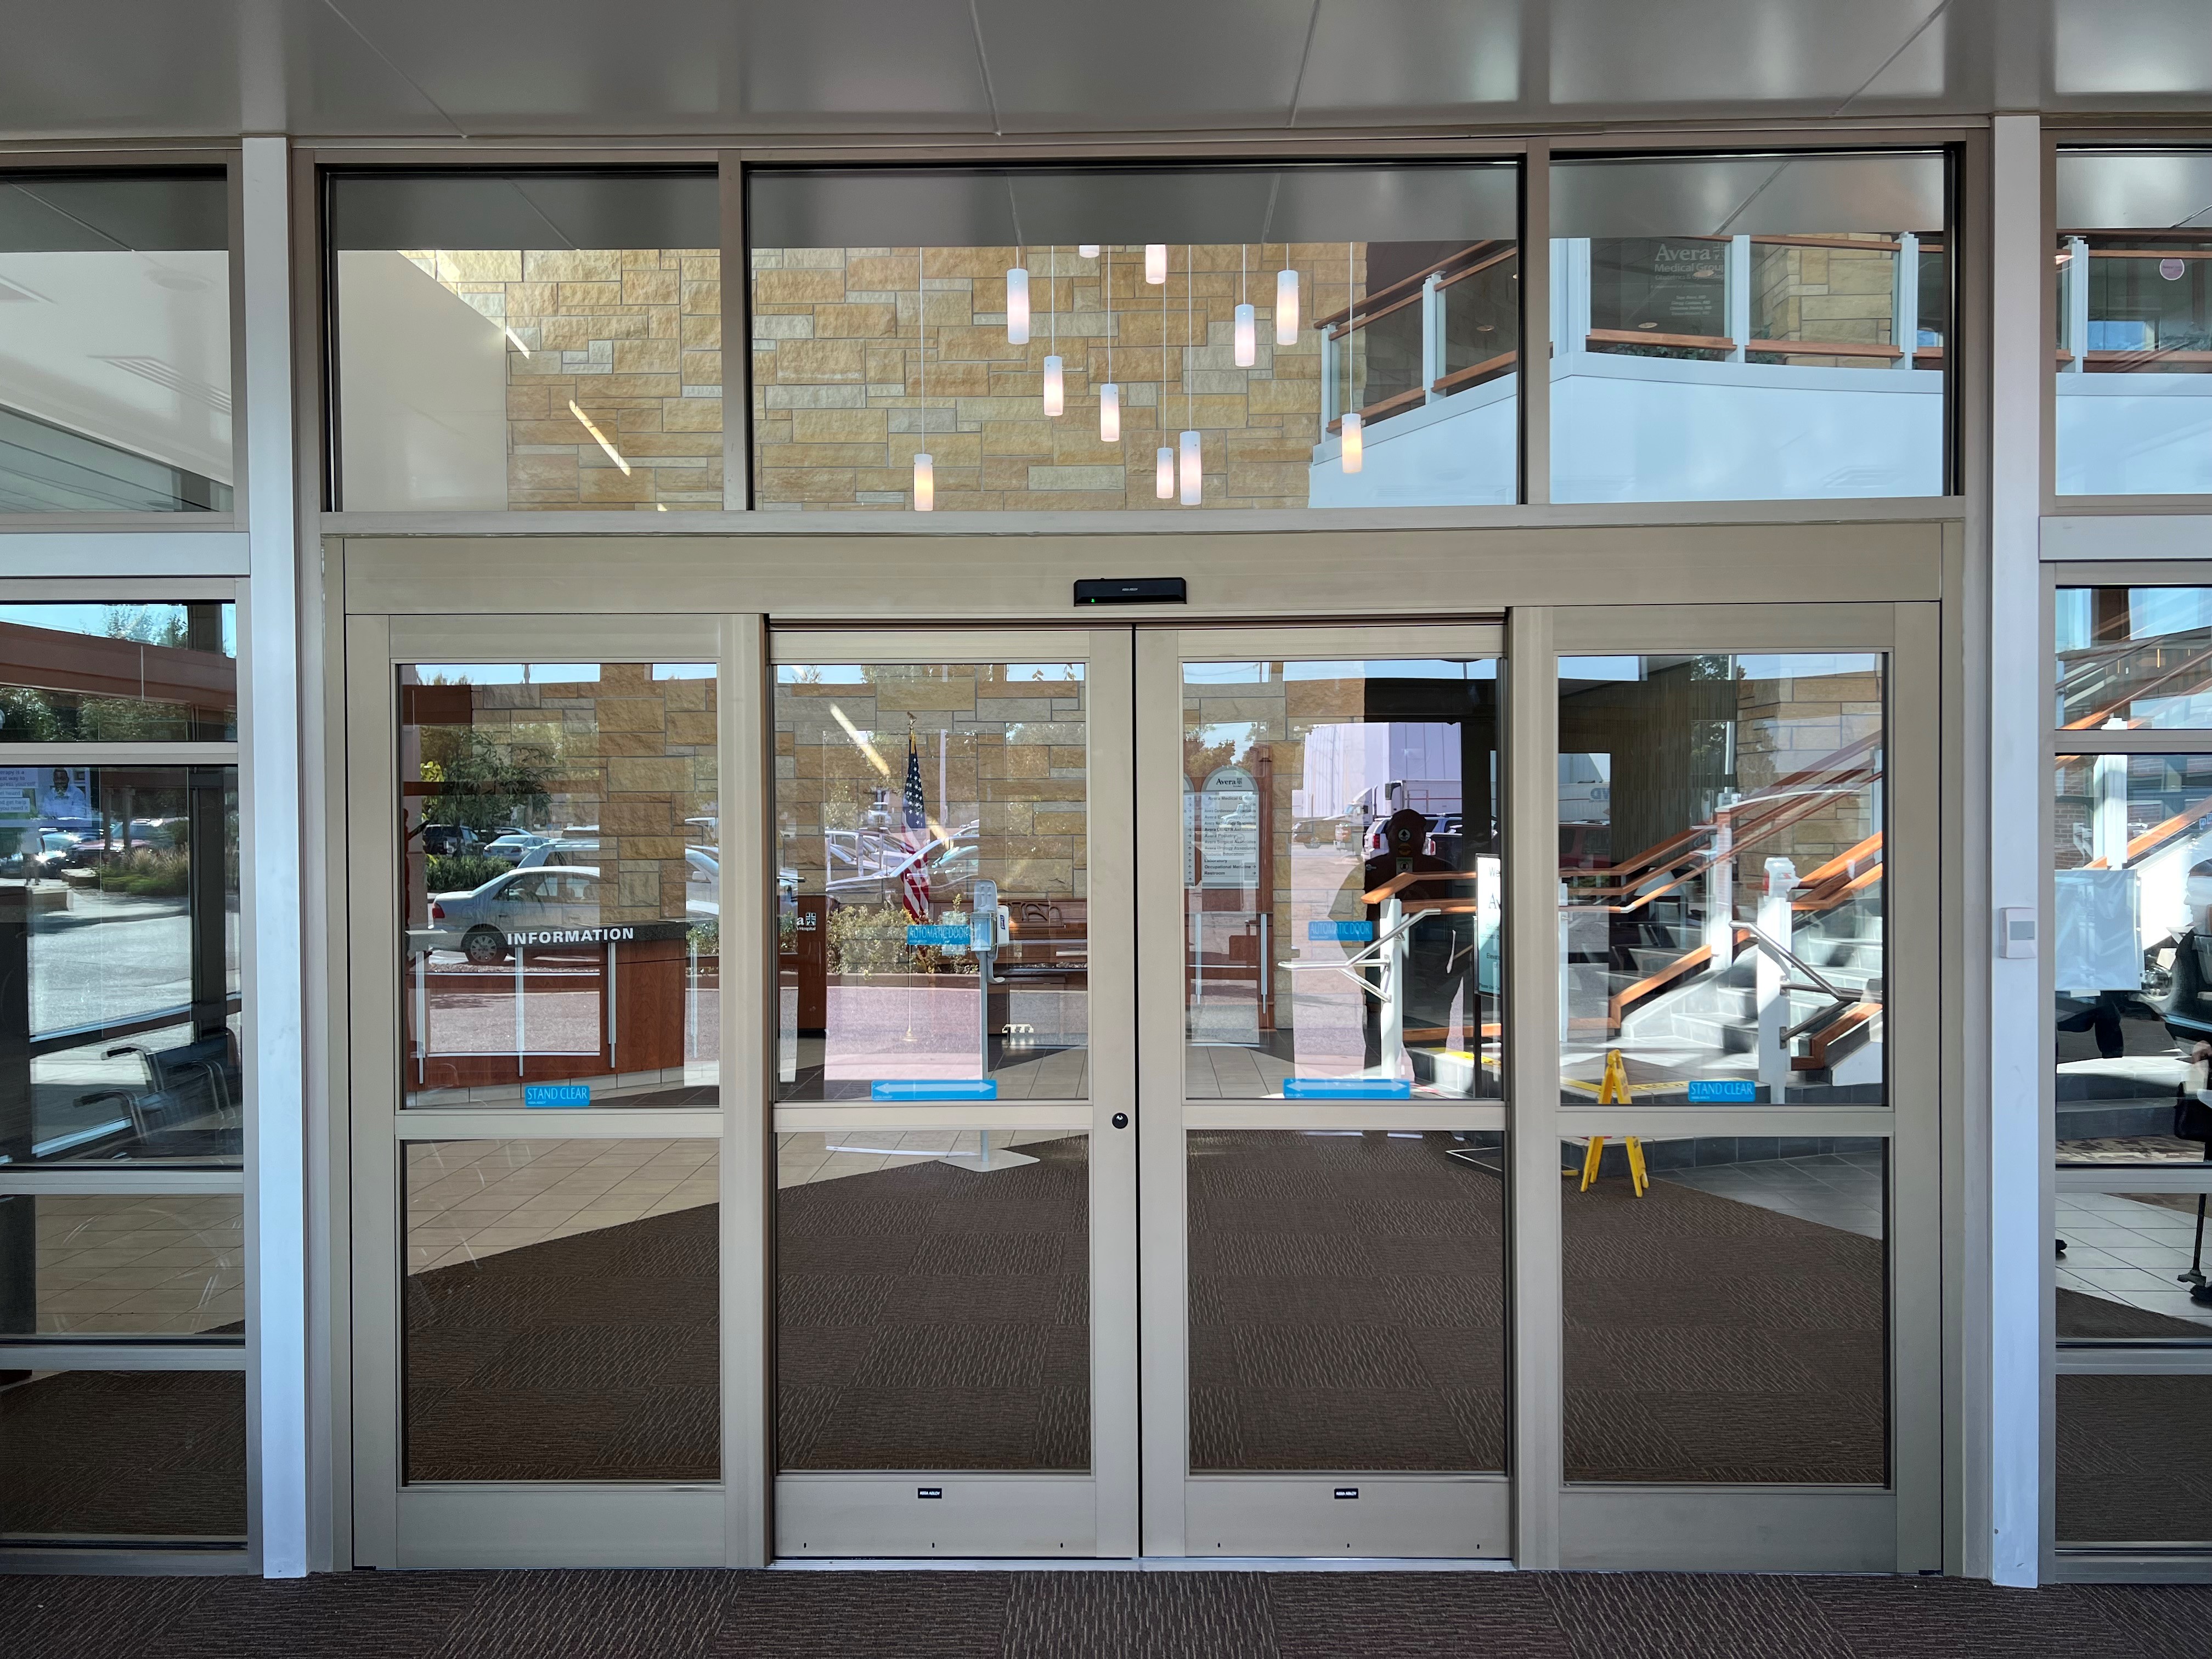 avera new entrance (outside looking in)